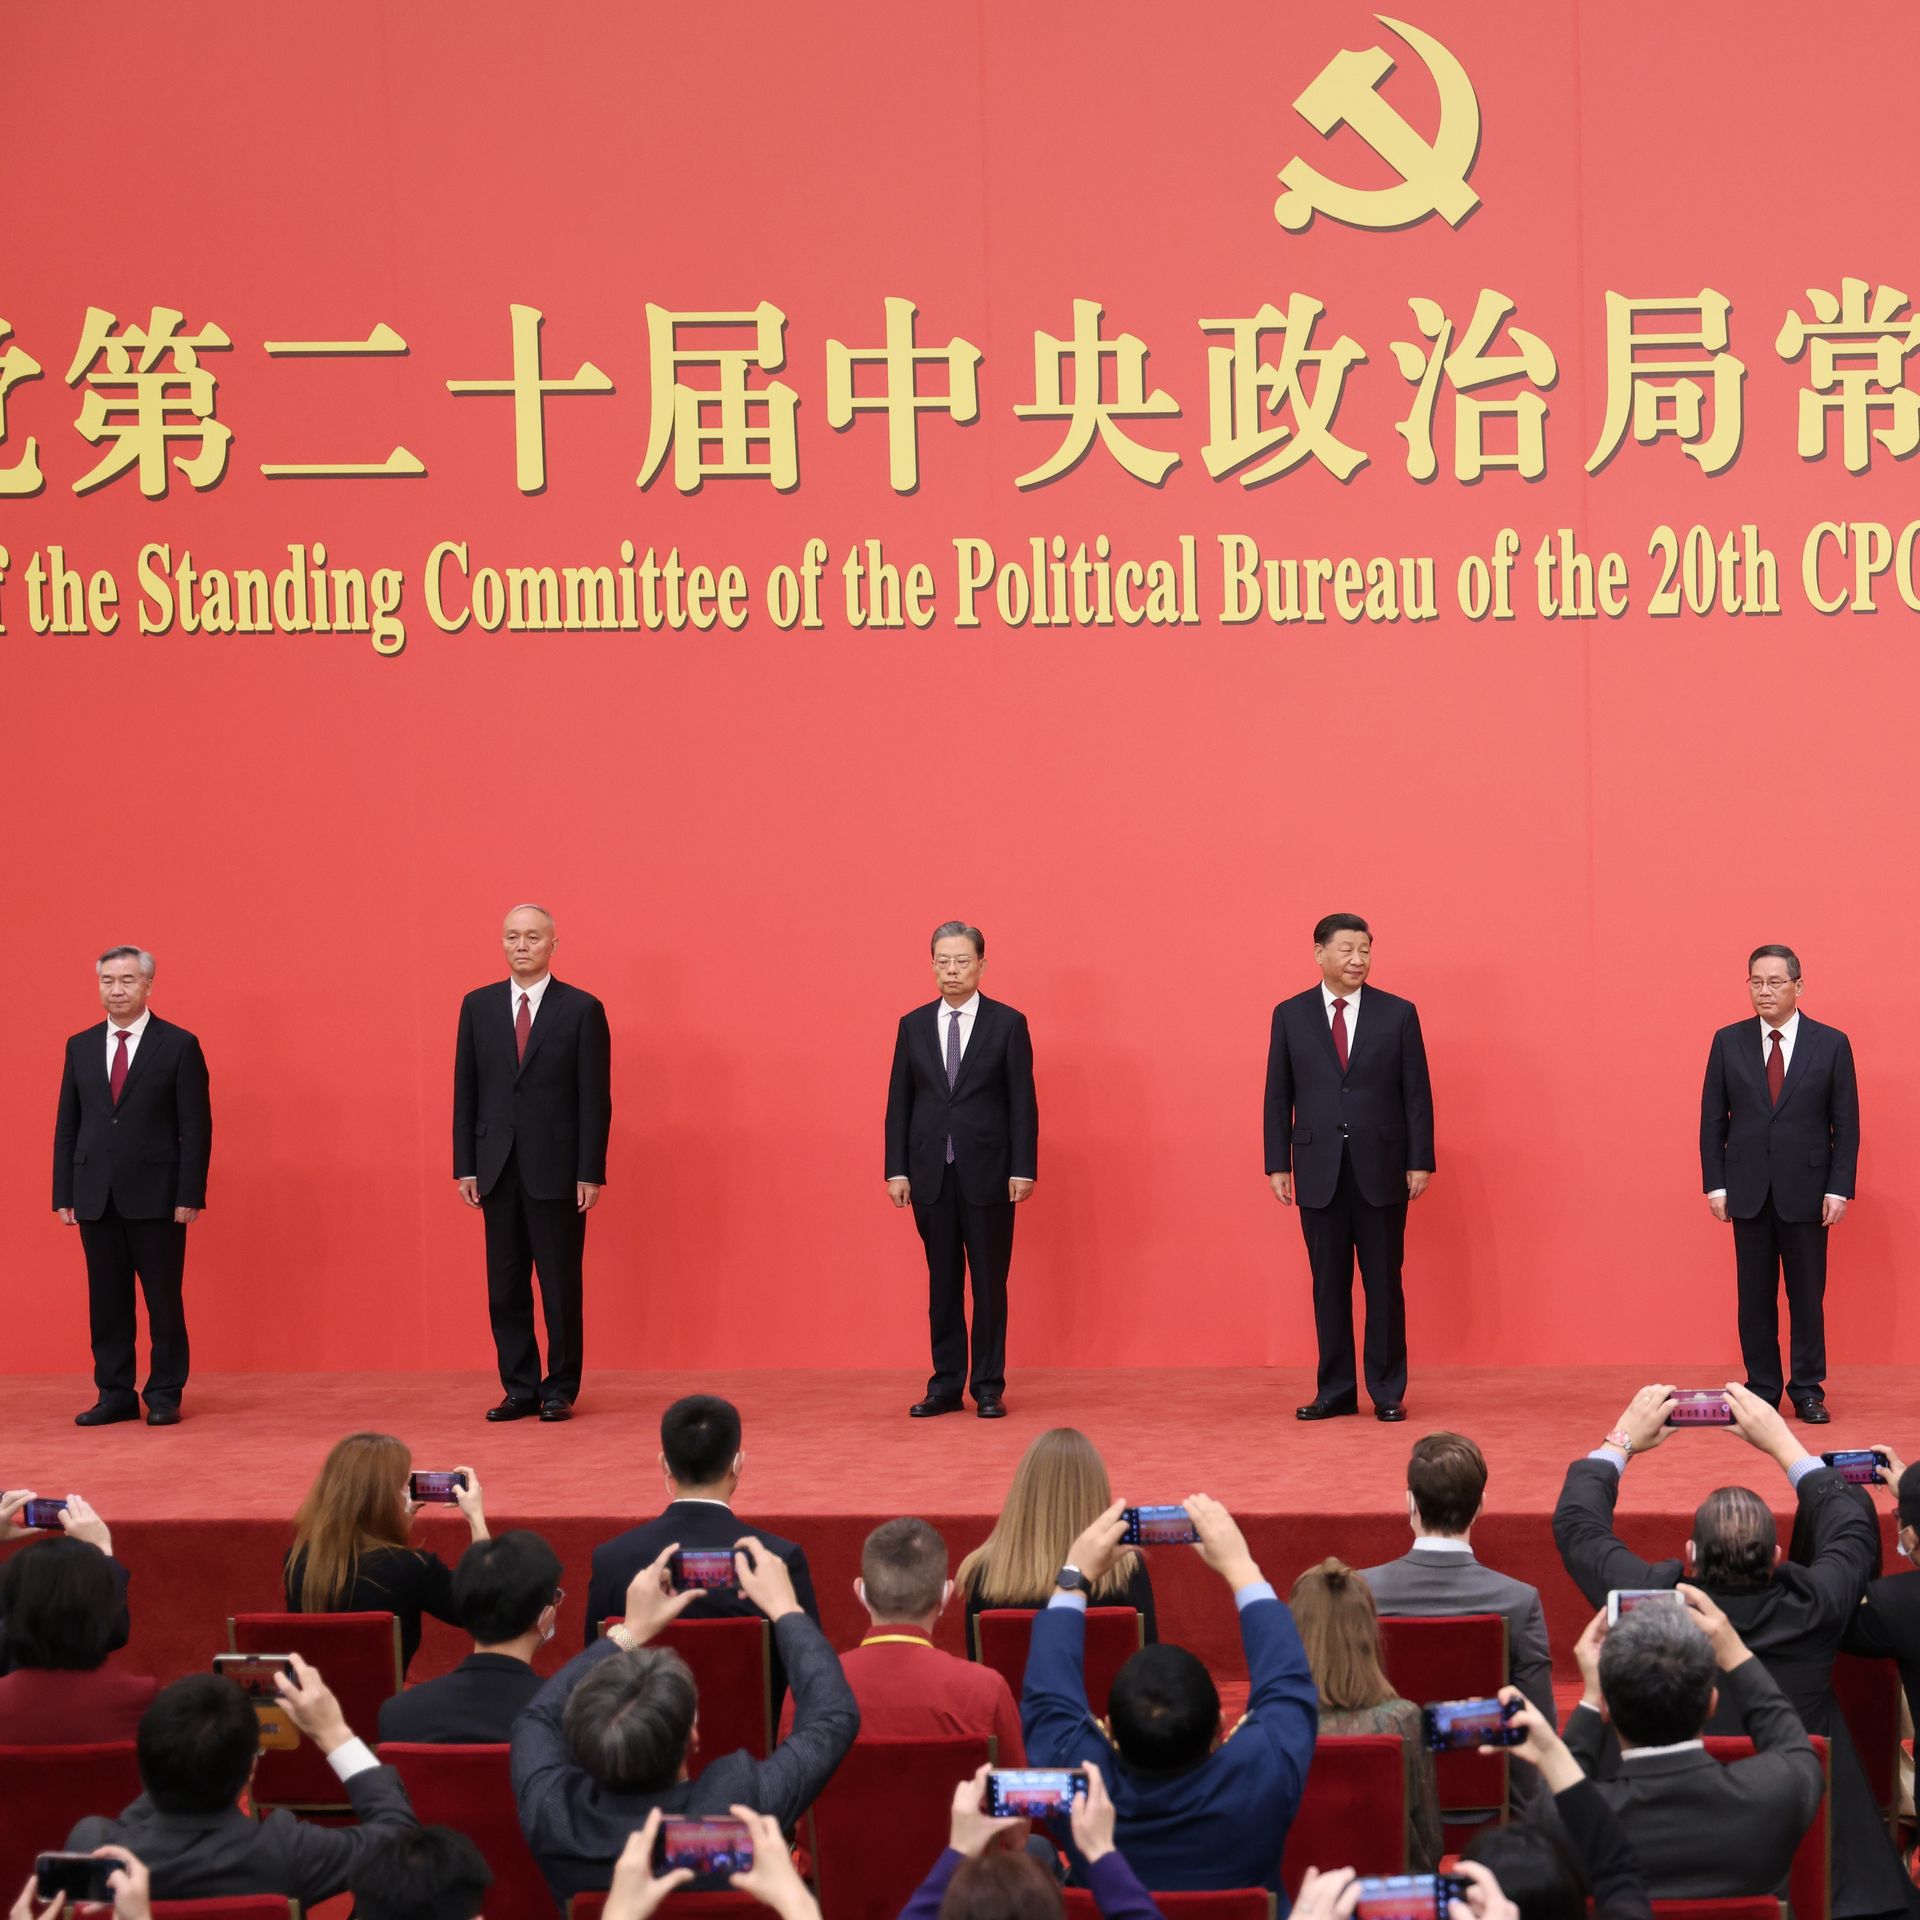 Xi Jinping secures 3rd term as Communist Party